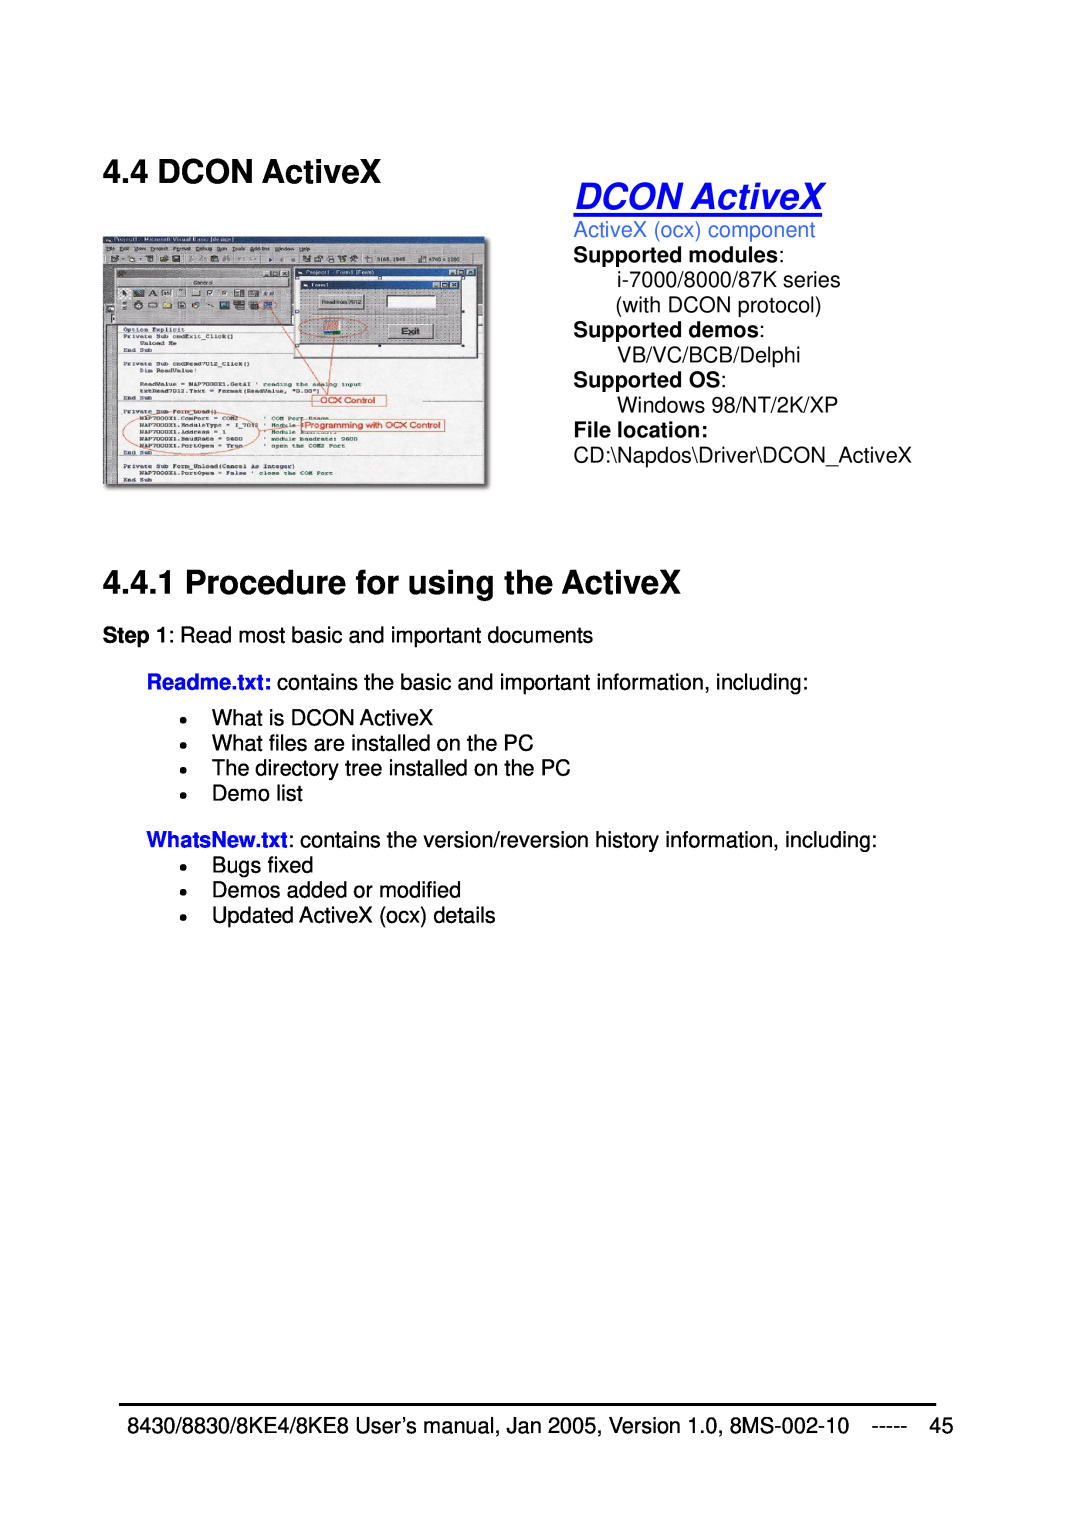 ICP DAS USA 8KE4, 8KE8, 8430, 8830 DCON ActiveX, Procedure for using the ActiveX, ActiveX ocx component Supported modules 